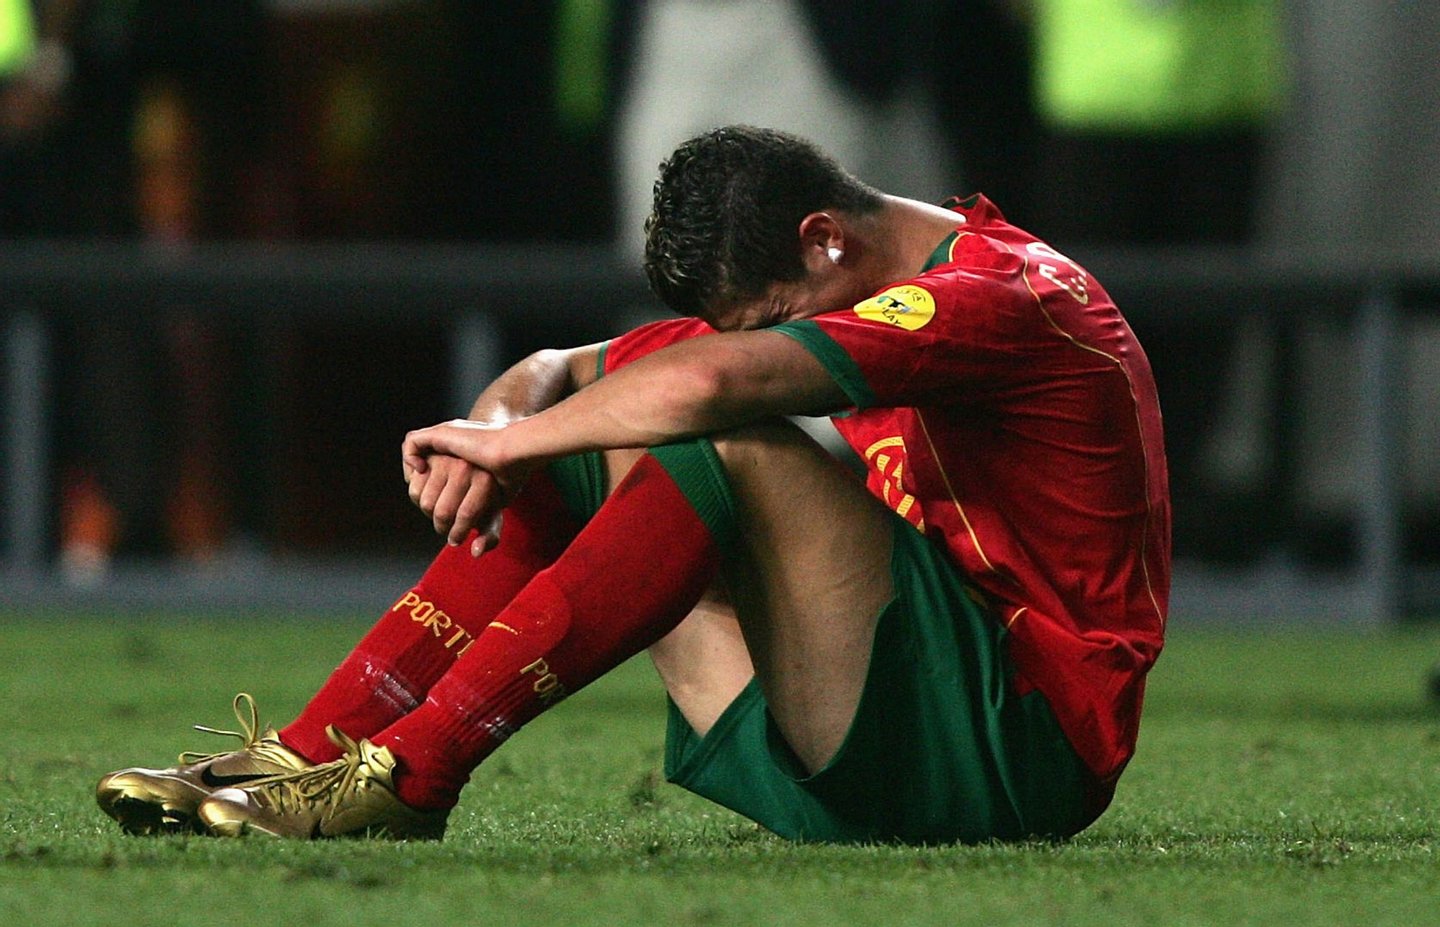 LISBON, PORTUGAL - JULY 4: Cristiano Ronaldo of Portugal in tears after the UEFA Euro 2004, Final match between Portugal and Greece at the Luz Stadium on July 4, 2004 in Lisbon, Portugal. (Photo by Ben Radford/Getty Images) *** Local Caption *** Cristiano Ronaldo